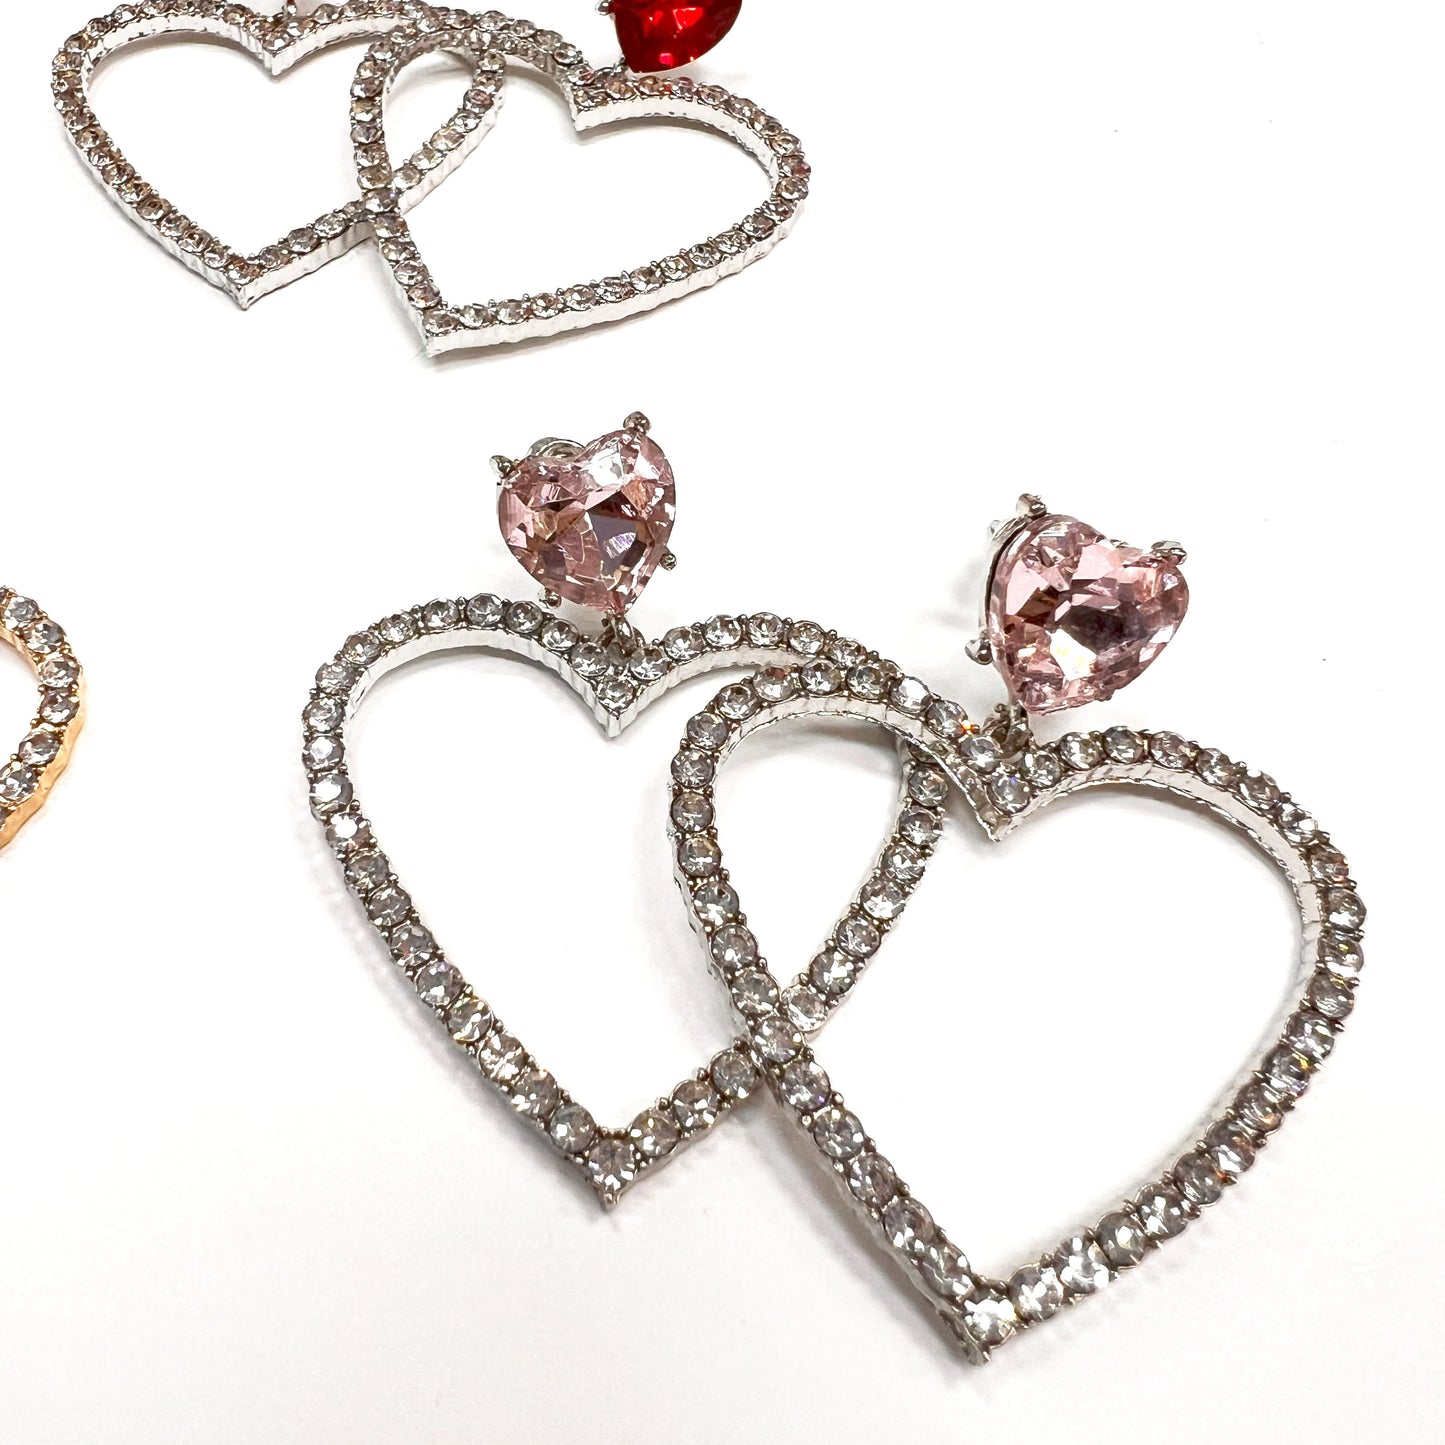 Sparkling Heart Earrings - AT FIRST SIGHT